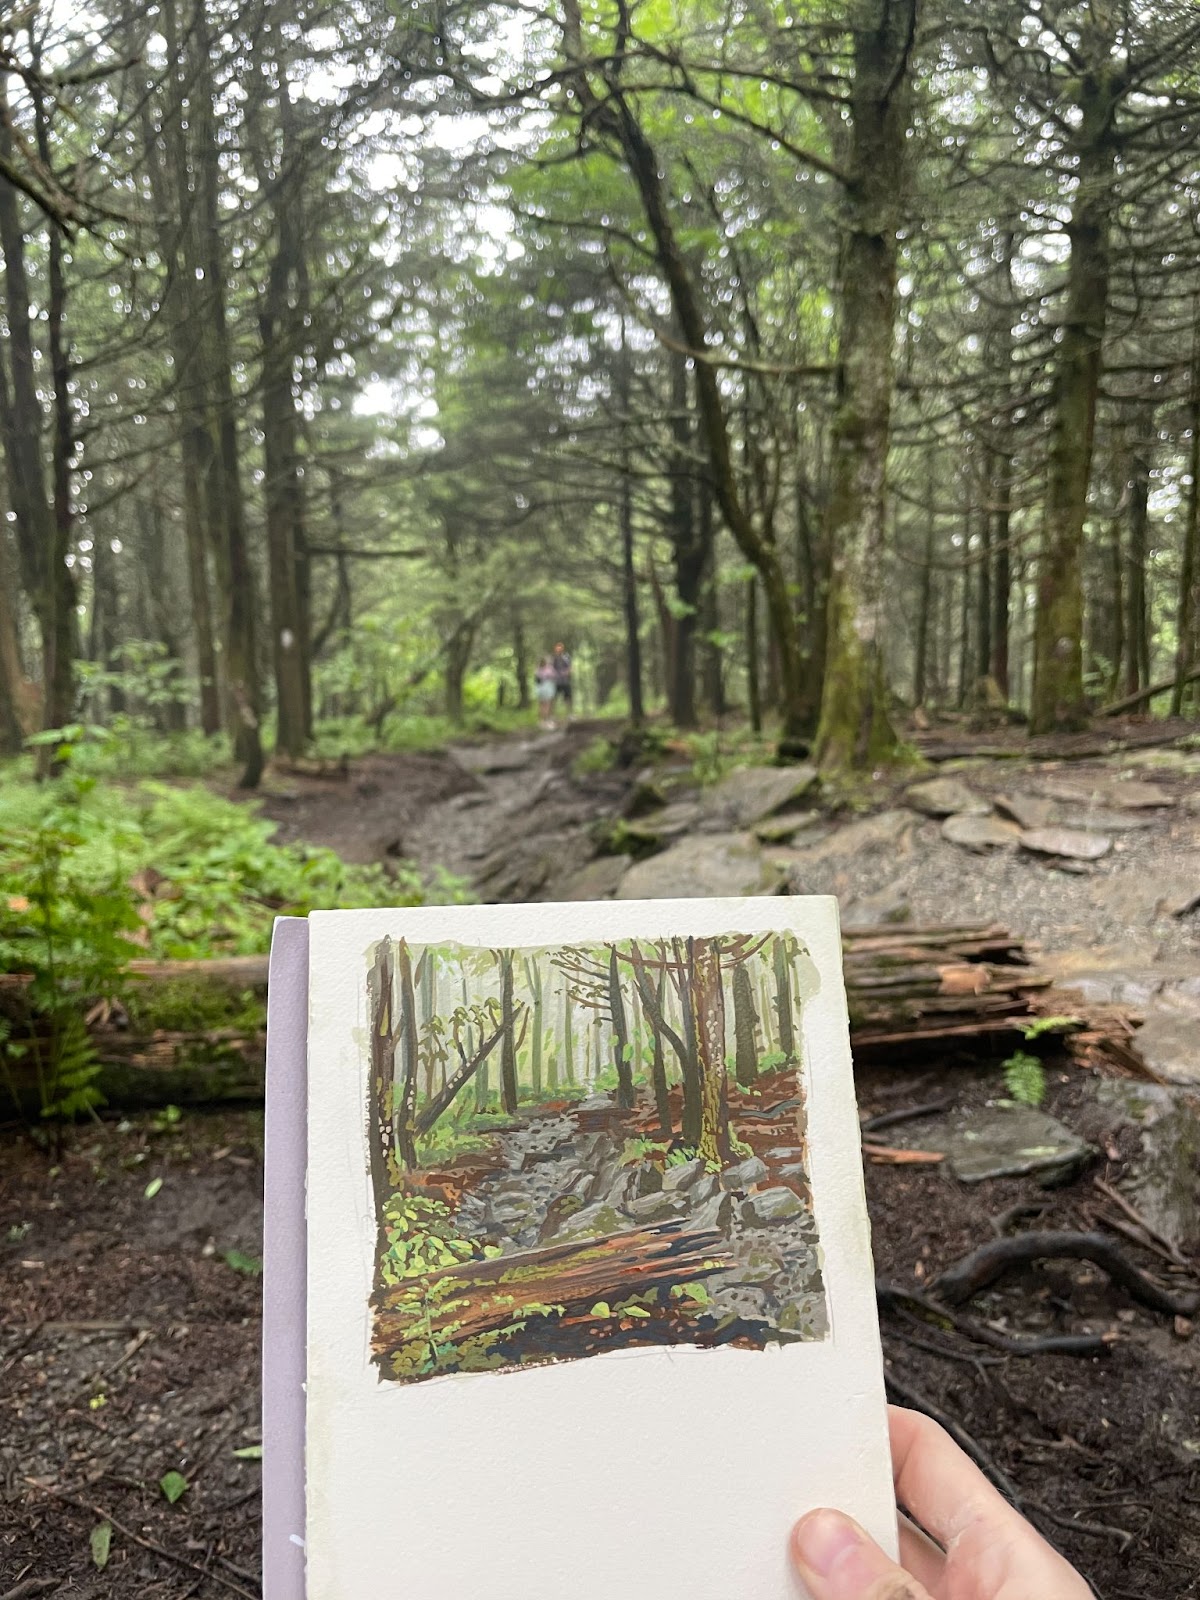 Photograph of a notebook painting being held up in front of a forest